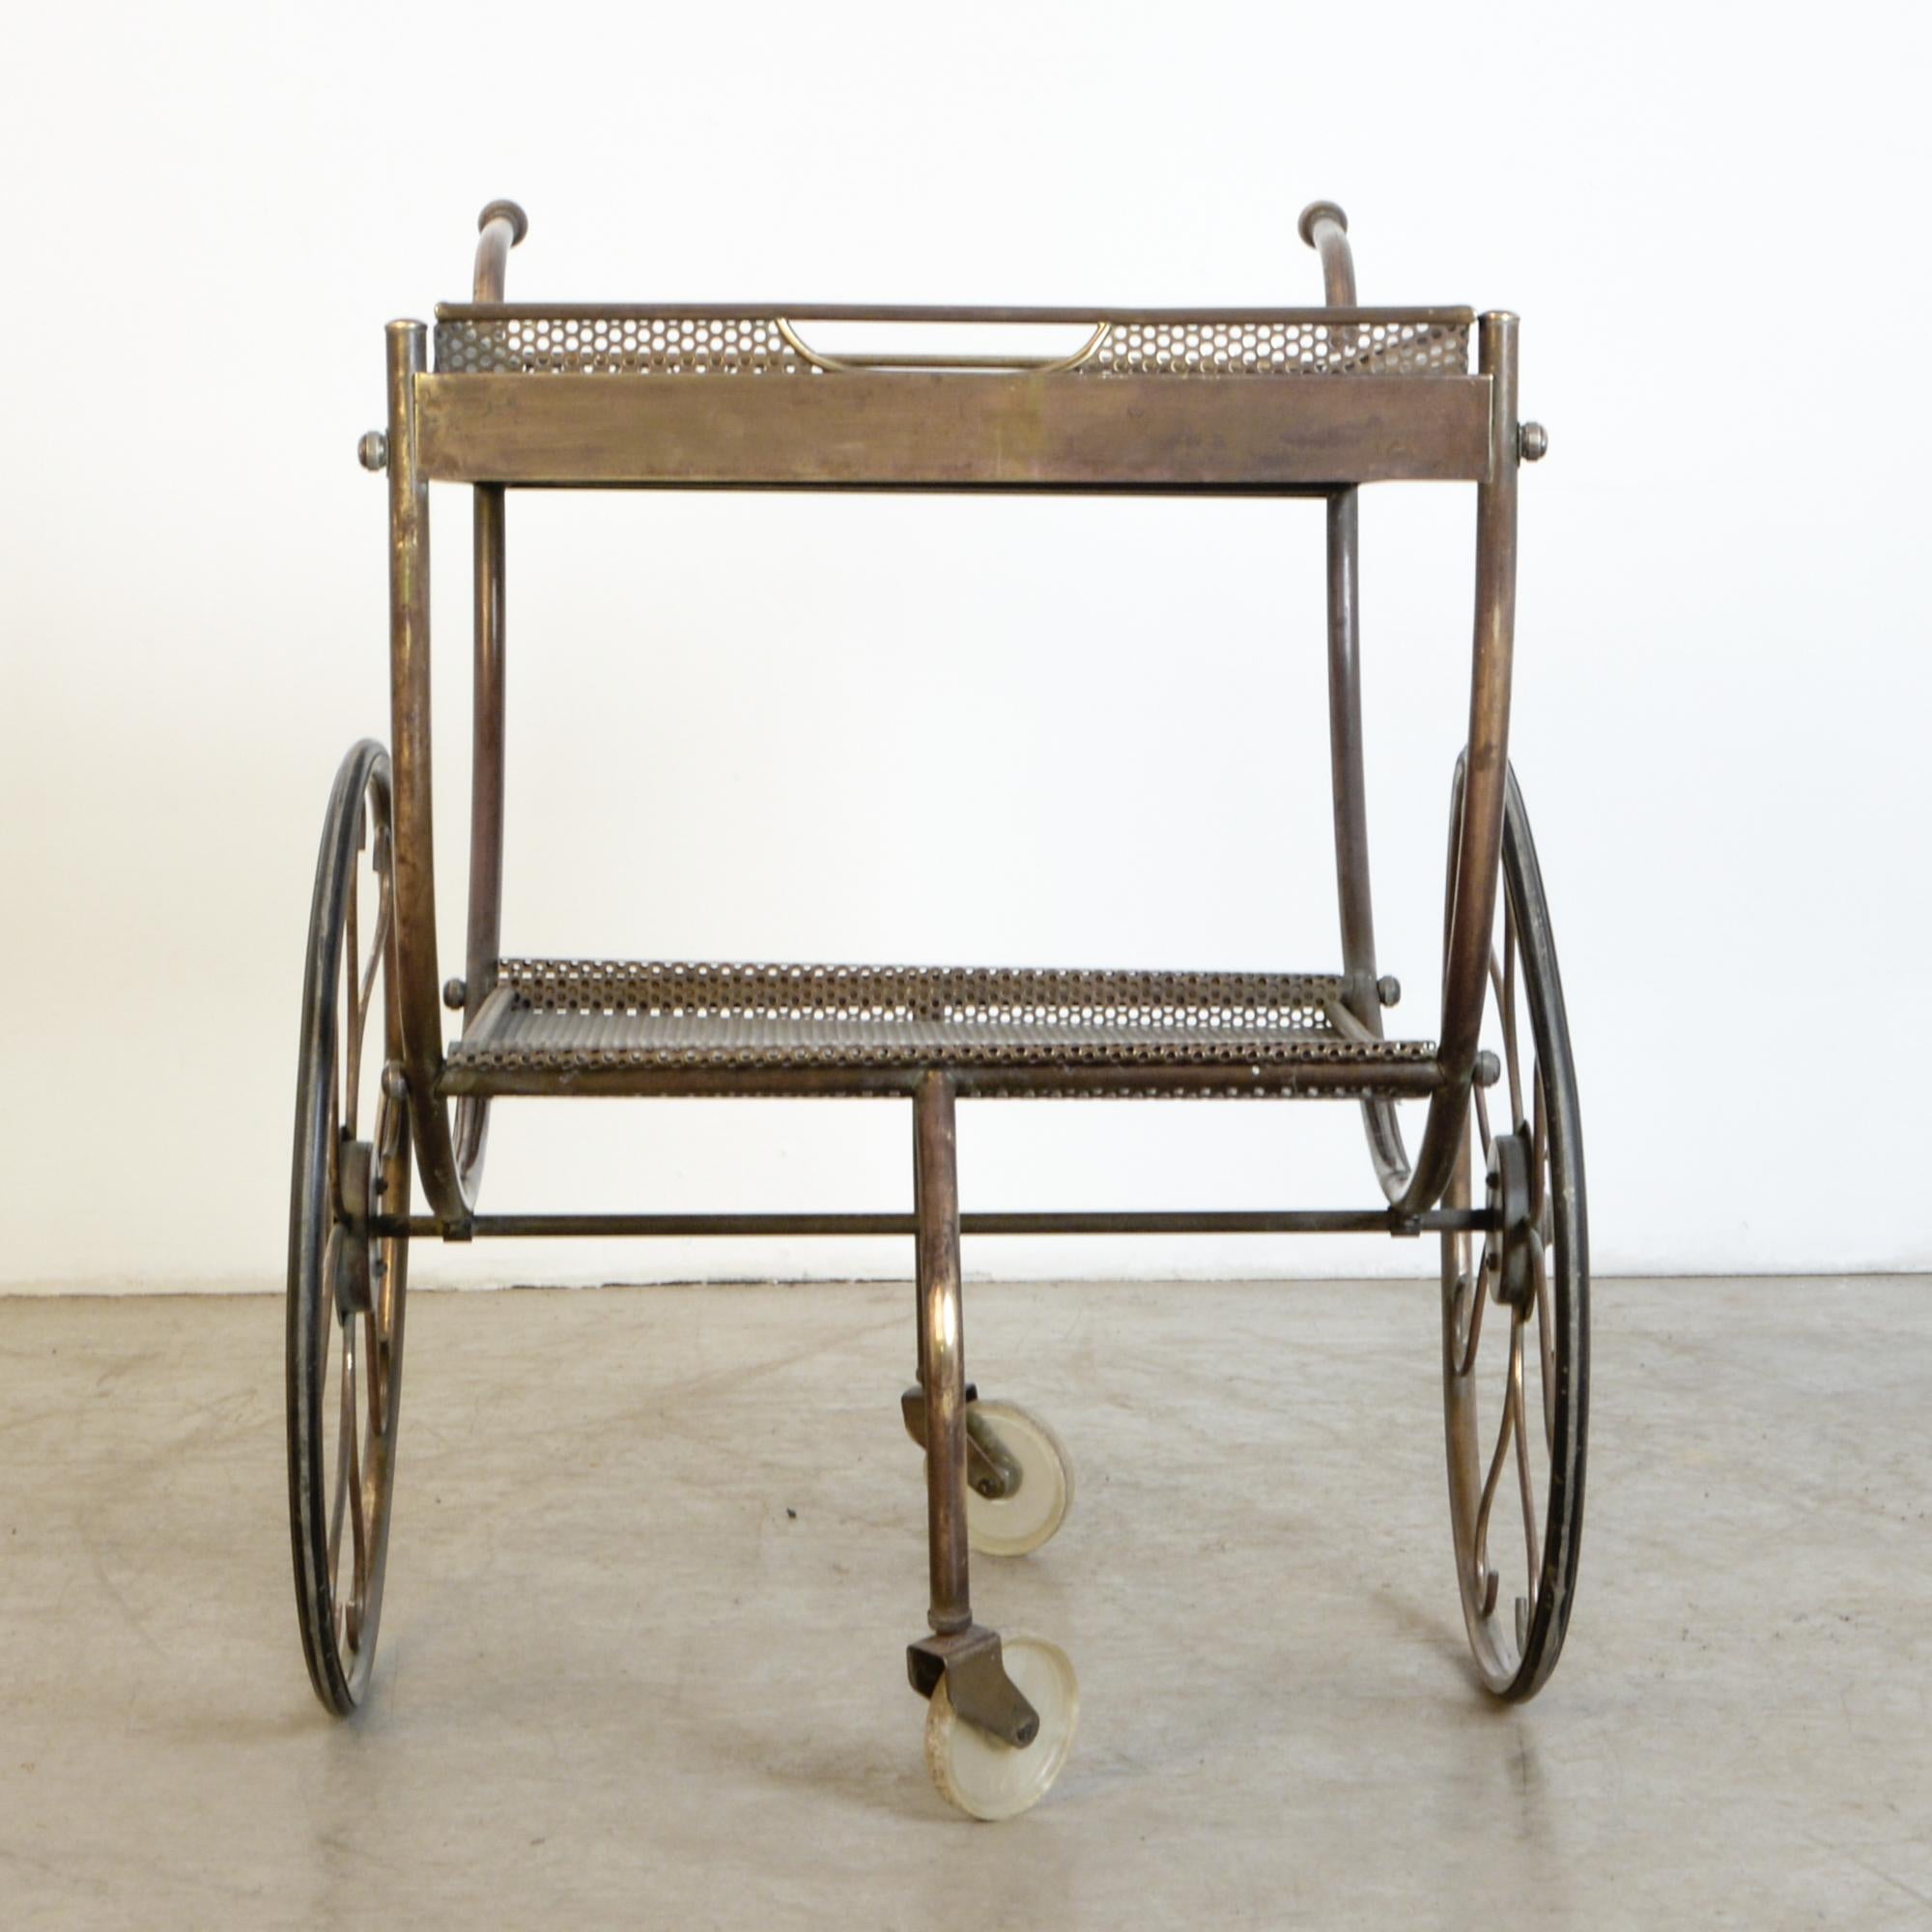 A great example of a classic design by Josef Svensk for Swedish furniture maker Svenskt Tenn from circa 1950. A beautiful decorative design with practical features, swivelling wheels, removable tray, and detailed construction. Great condition with a